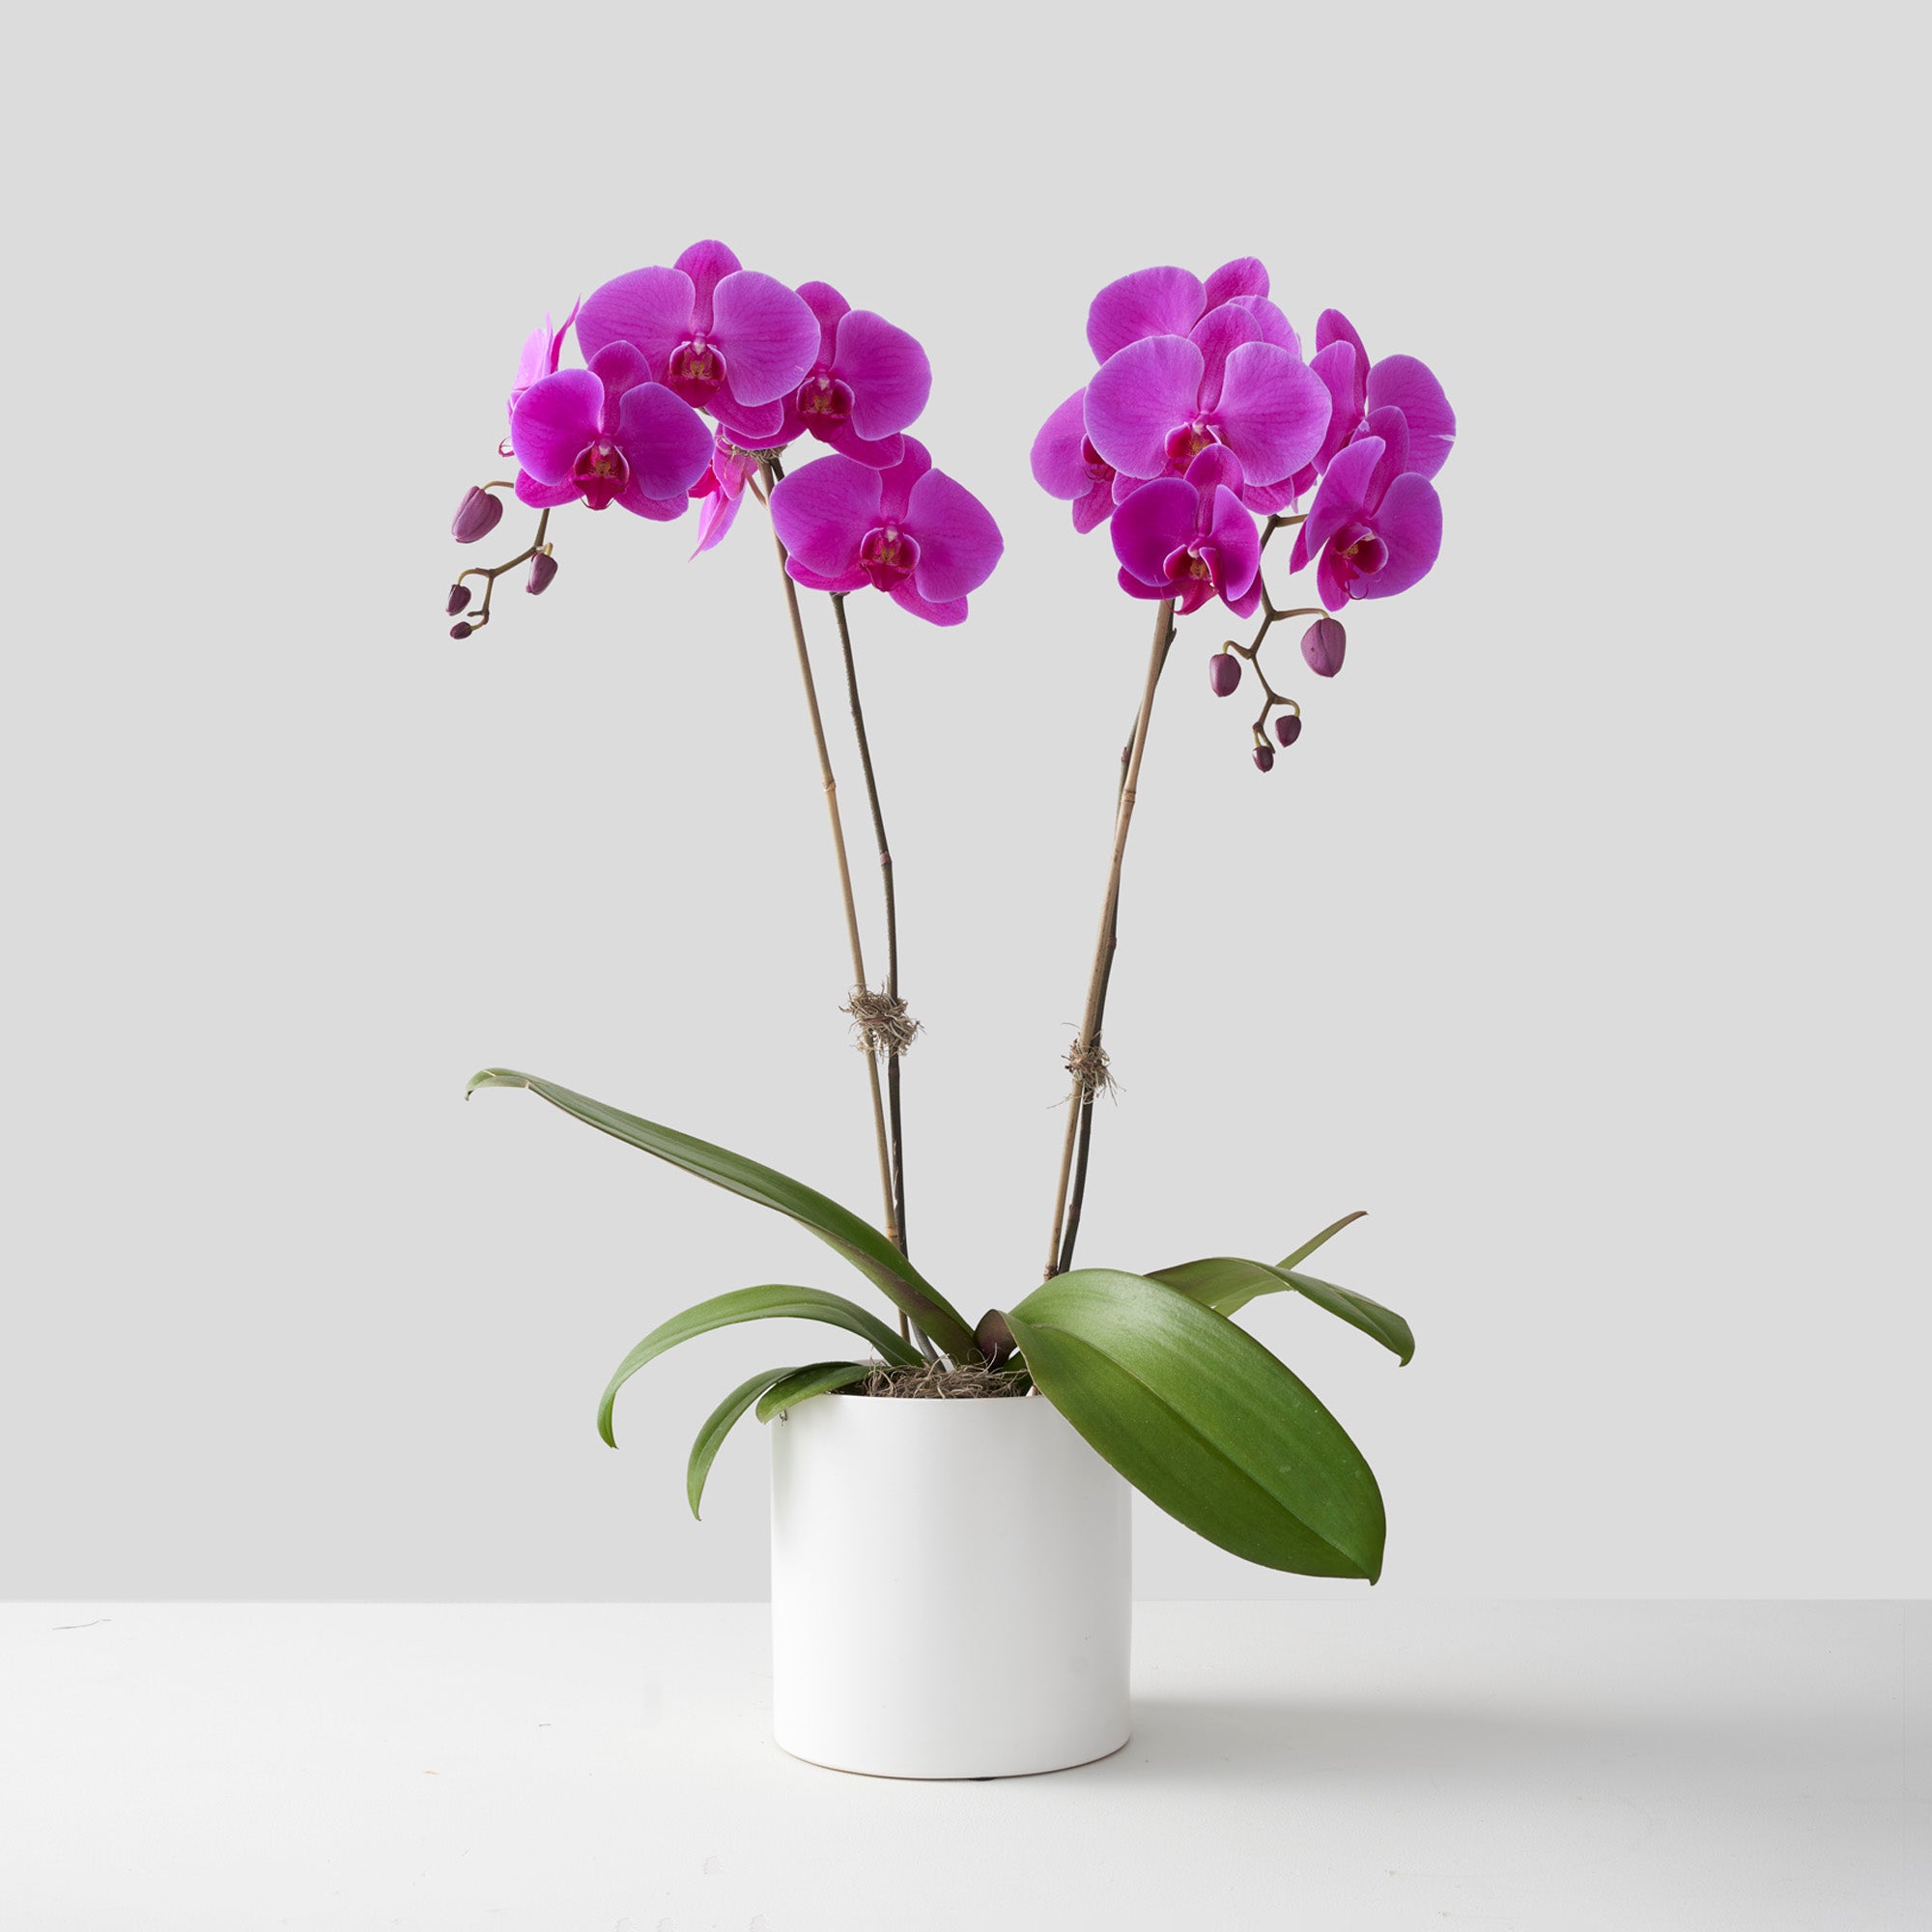 Fuchsia pink phalaenopsis orchid plant with two stems in white ceramic cylinder centered on white background.